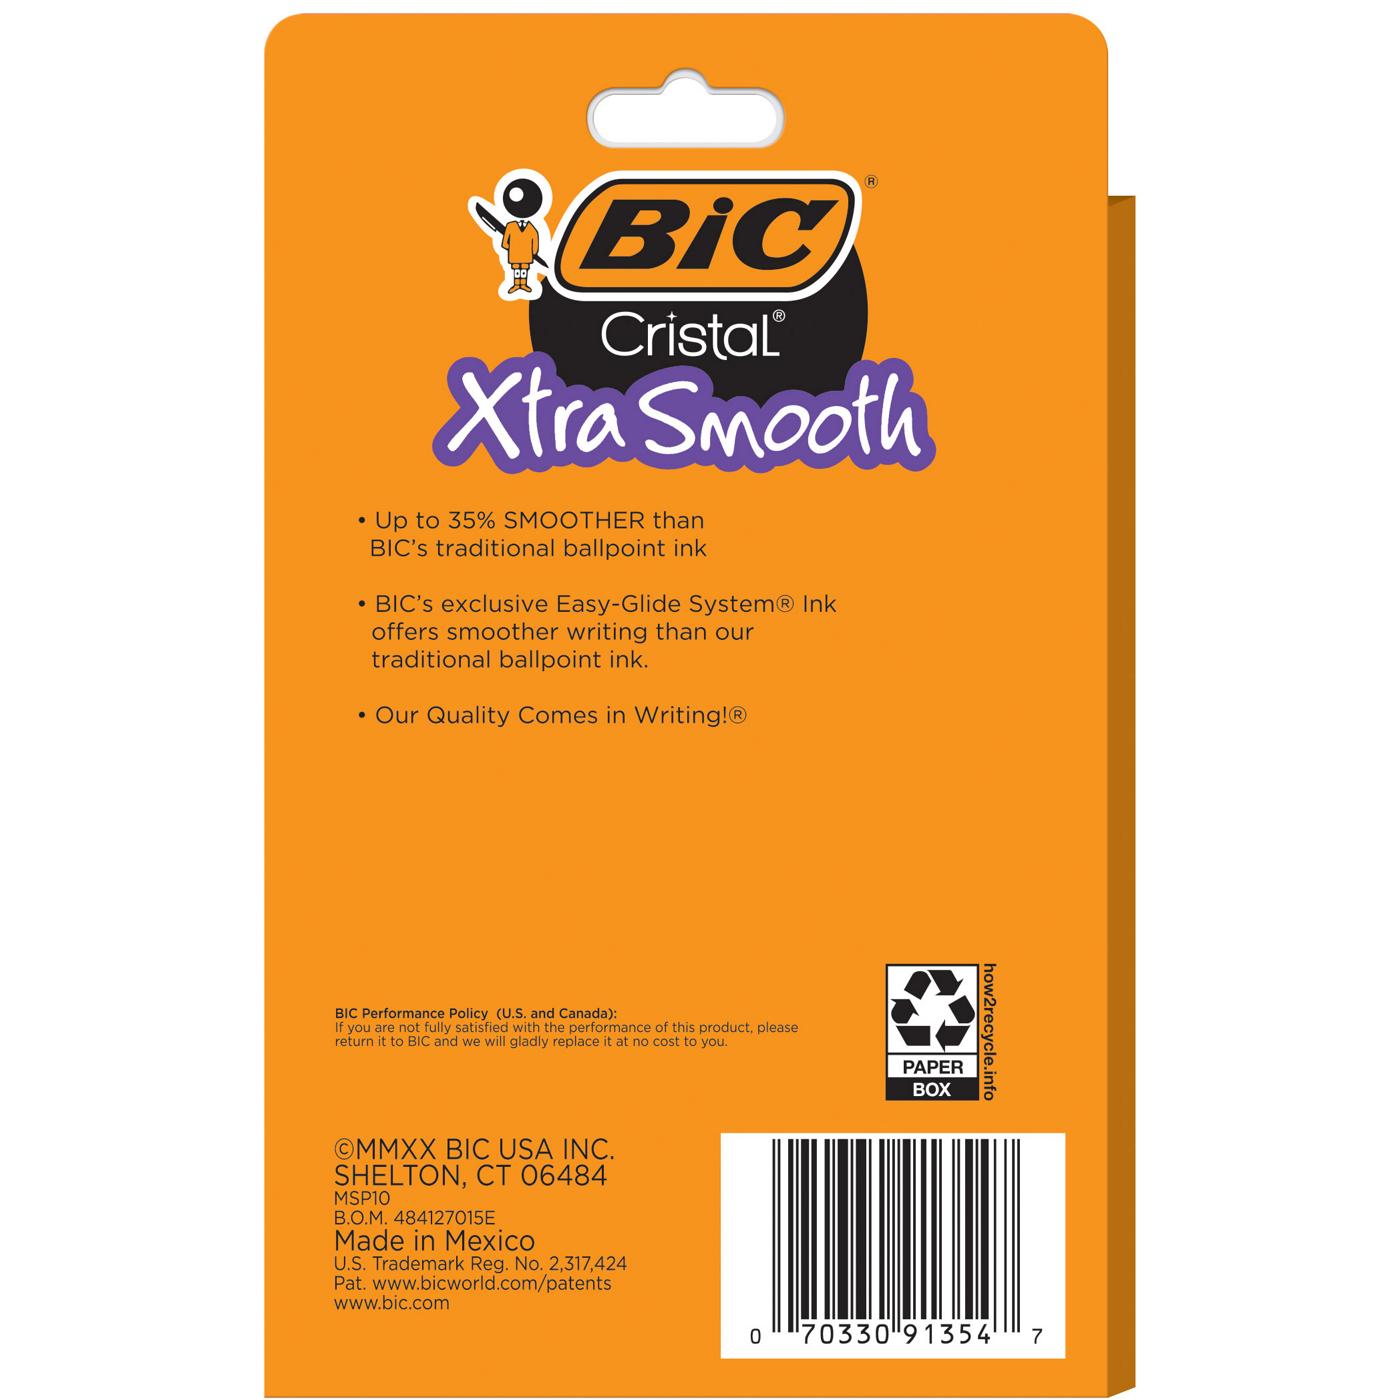 BIC Cristal Xtra Smooth 1.0mm Ball Pens - Red Ink; image 2 of 2